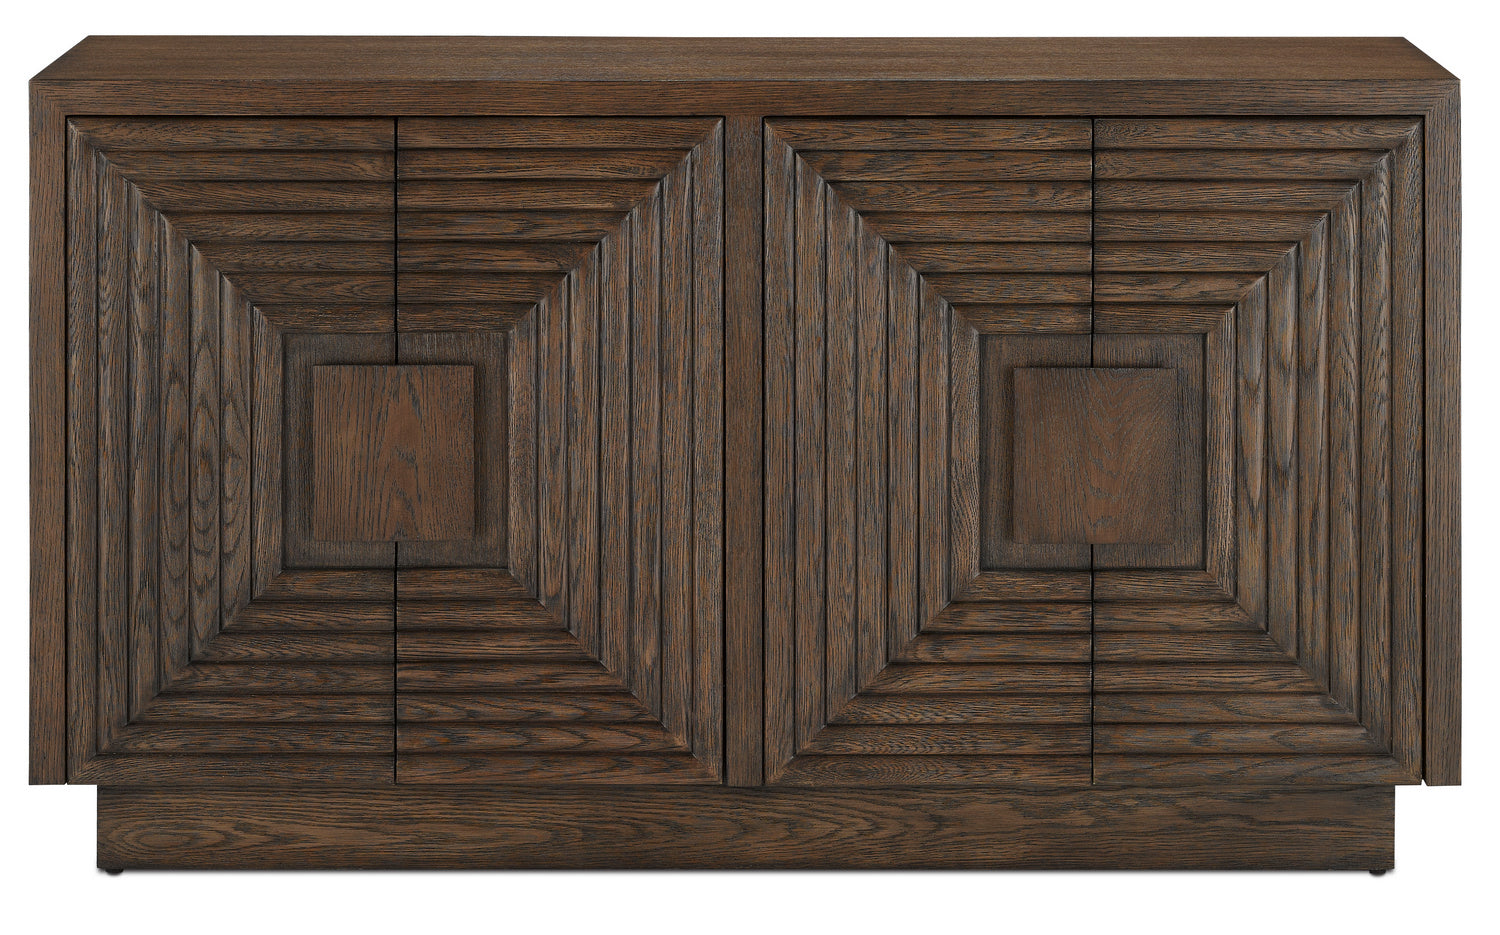 Cabinet from the Morombe collection in Distressed Cocoa finish